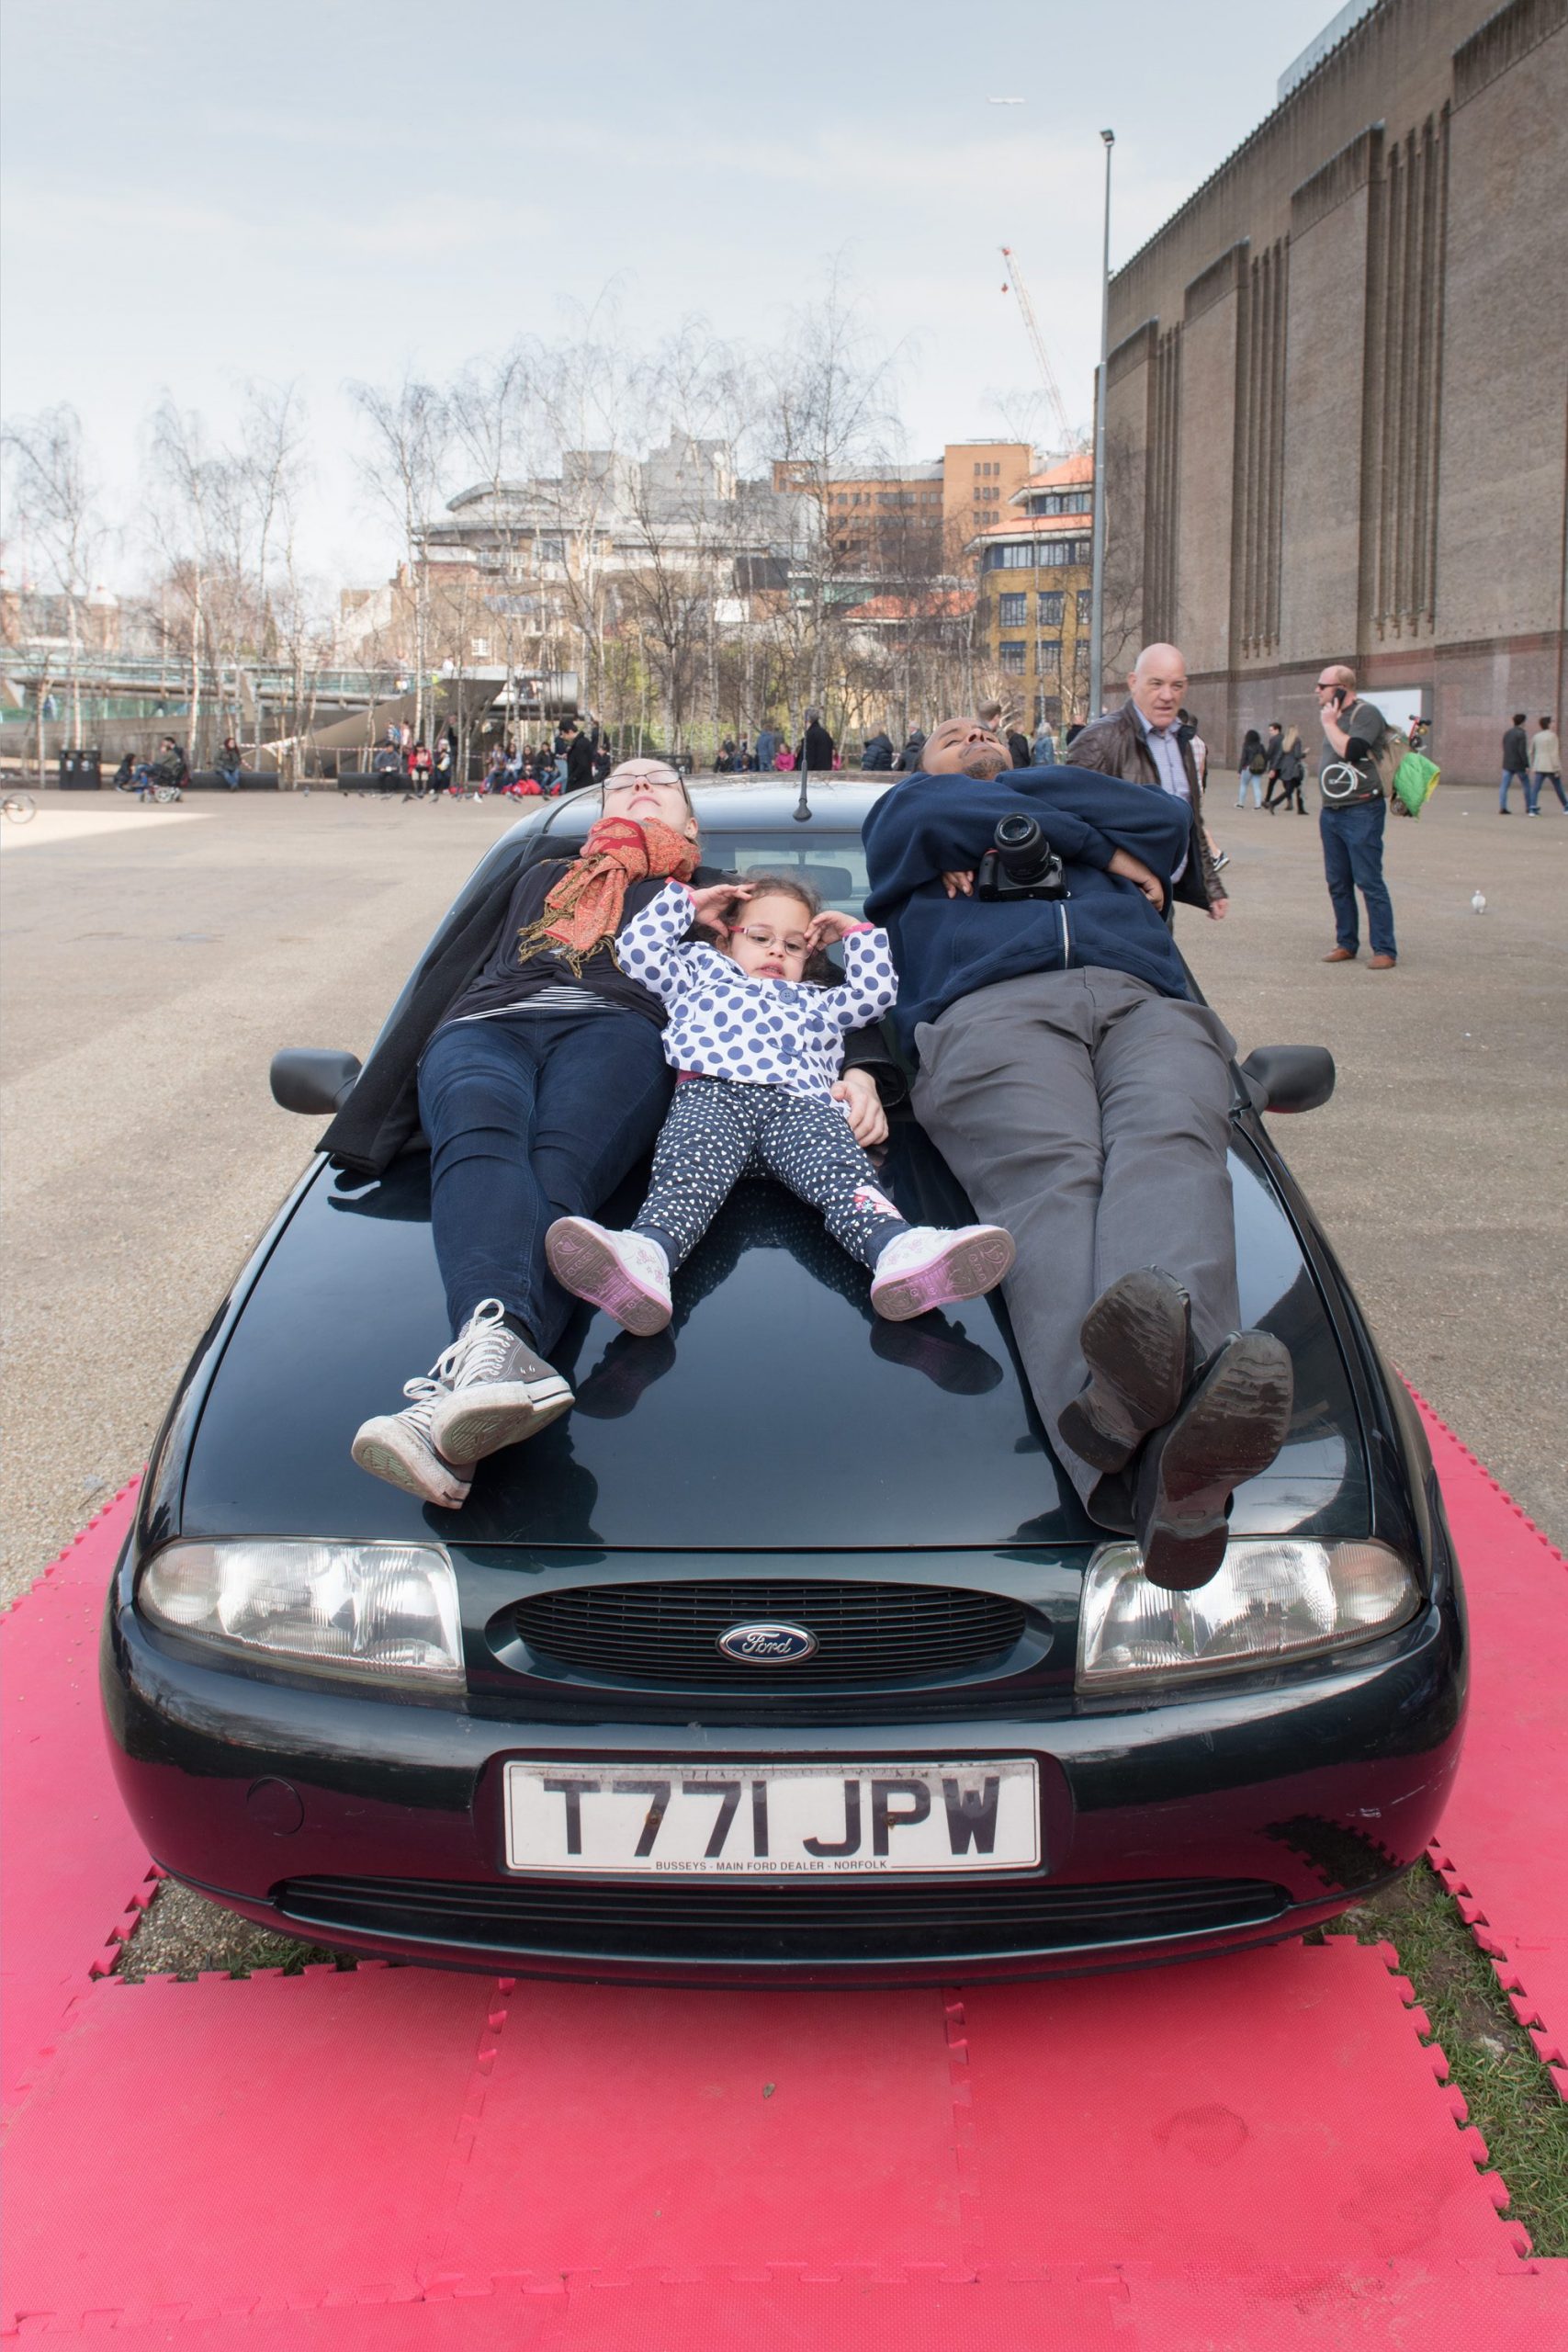 a child and two adults lie on top of a car outside the Tate Modern.